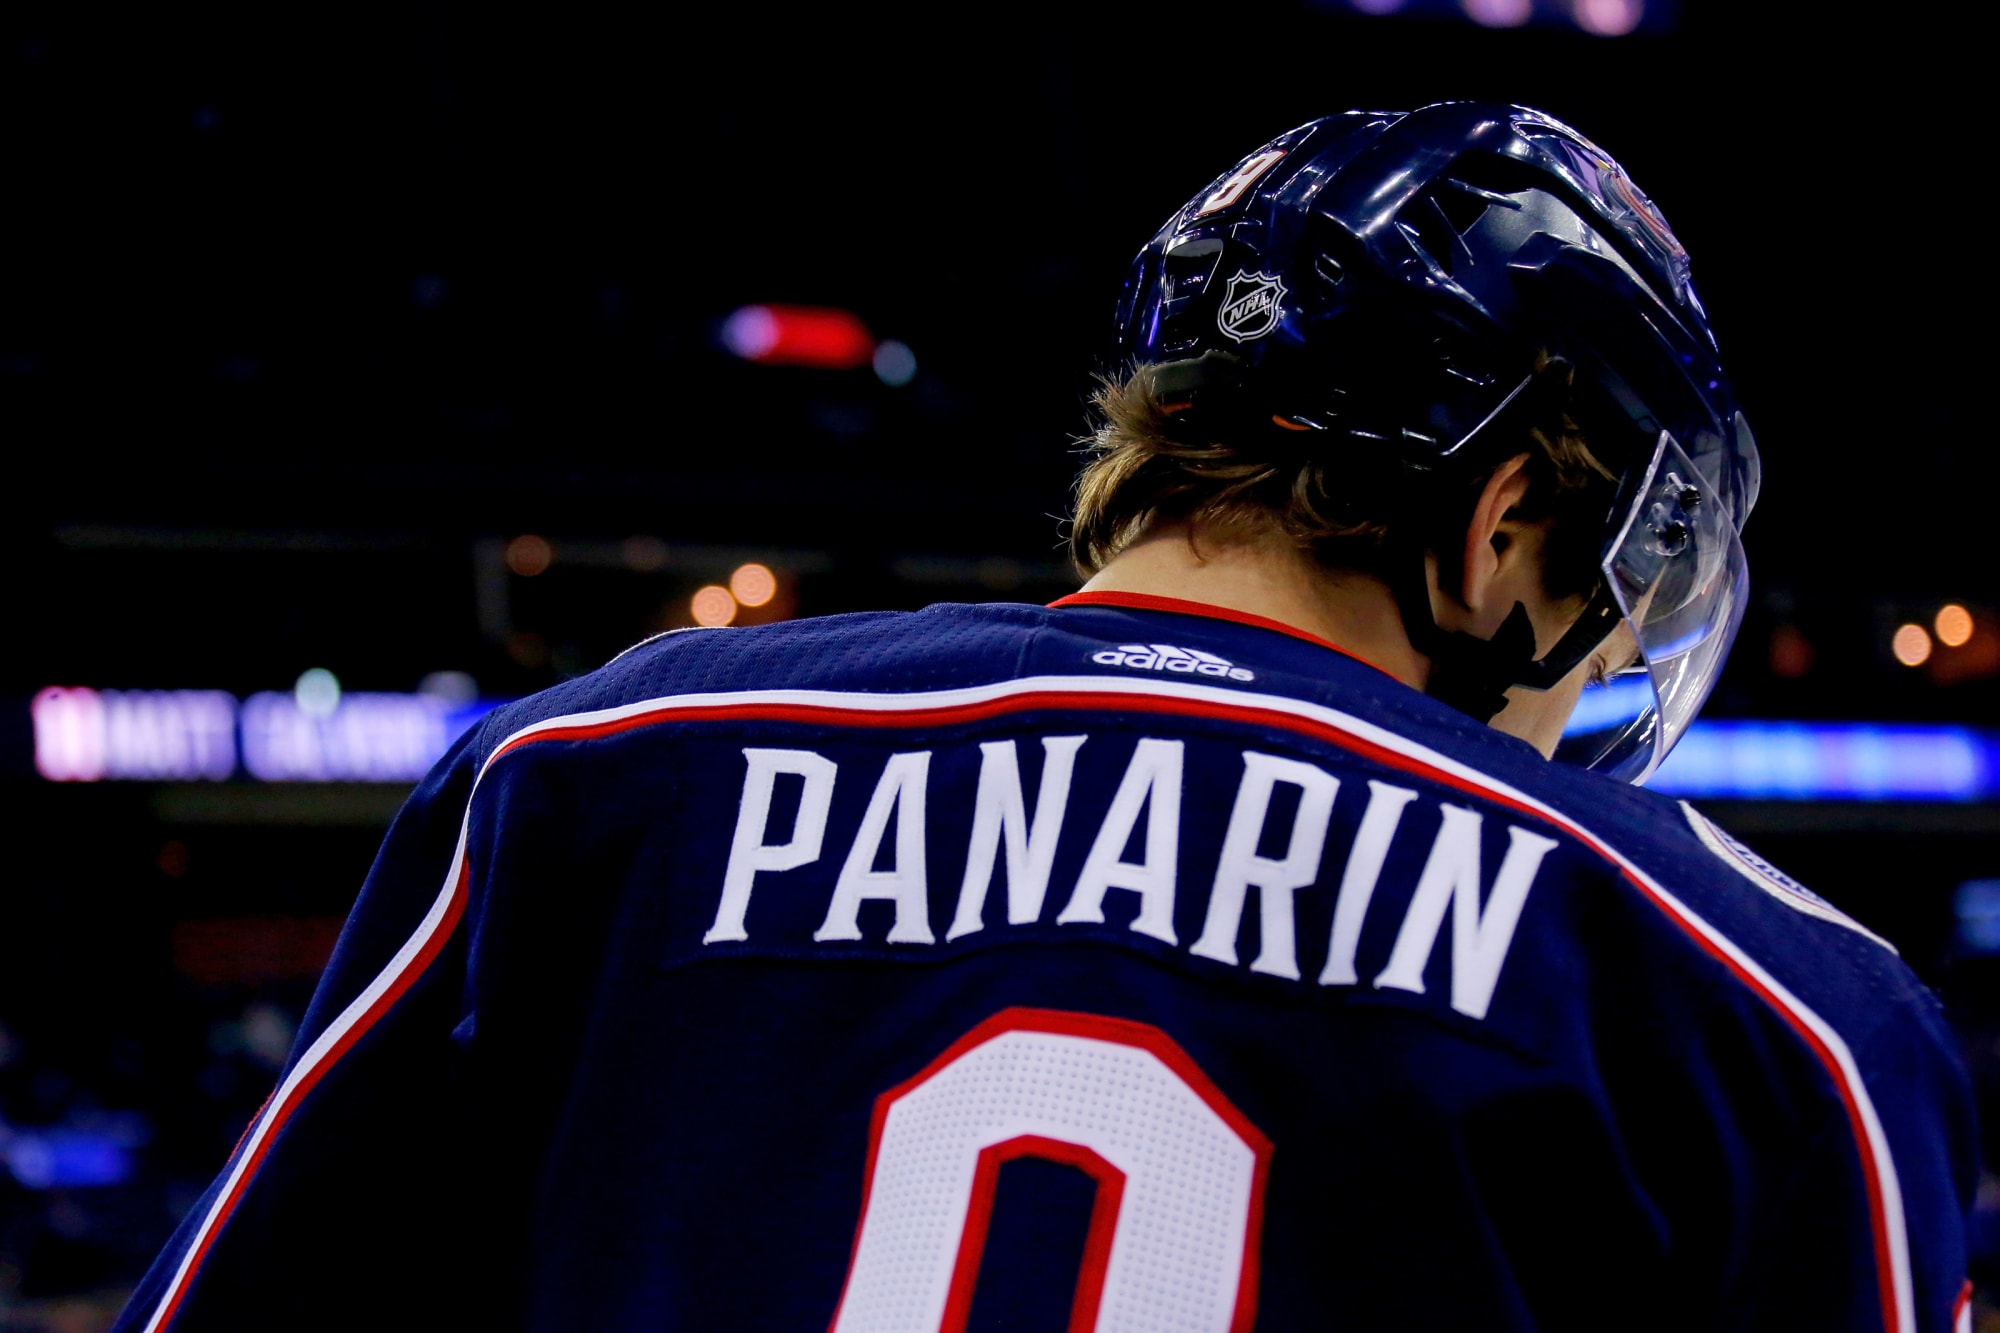 The Artemi Panarin story smells even more